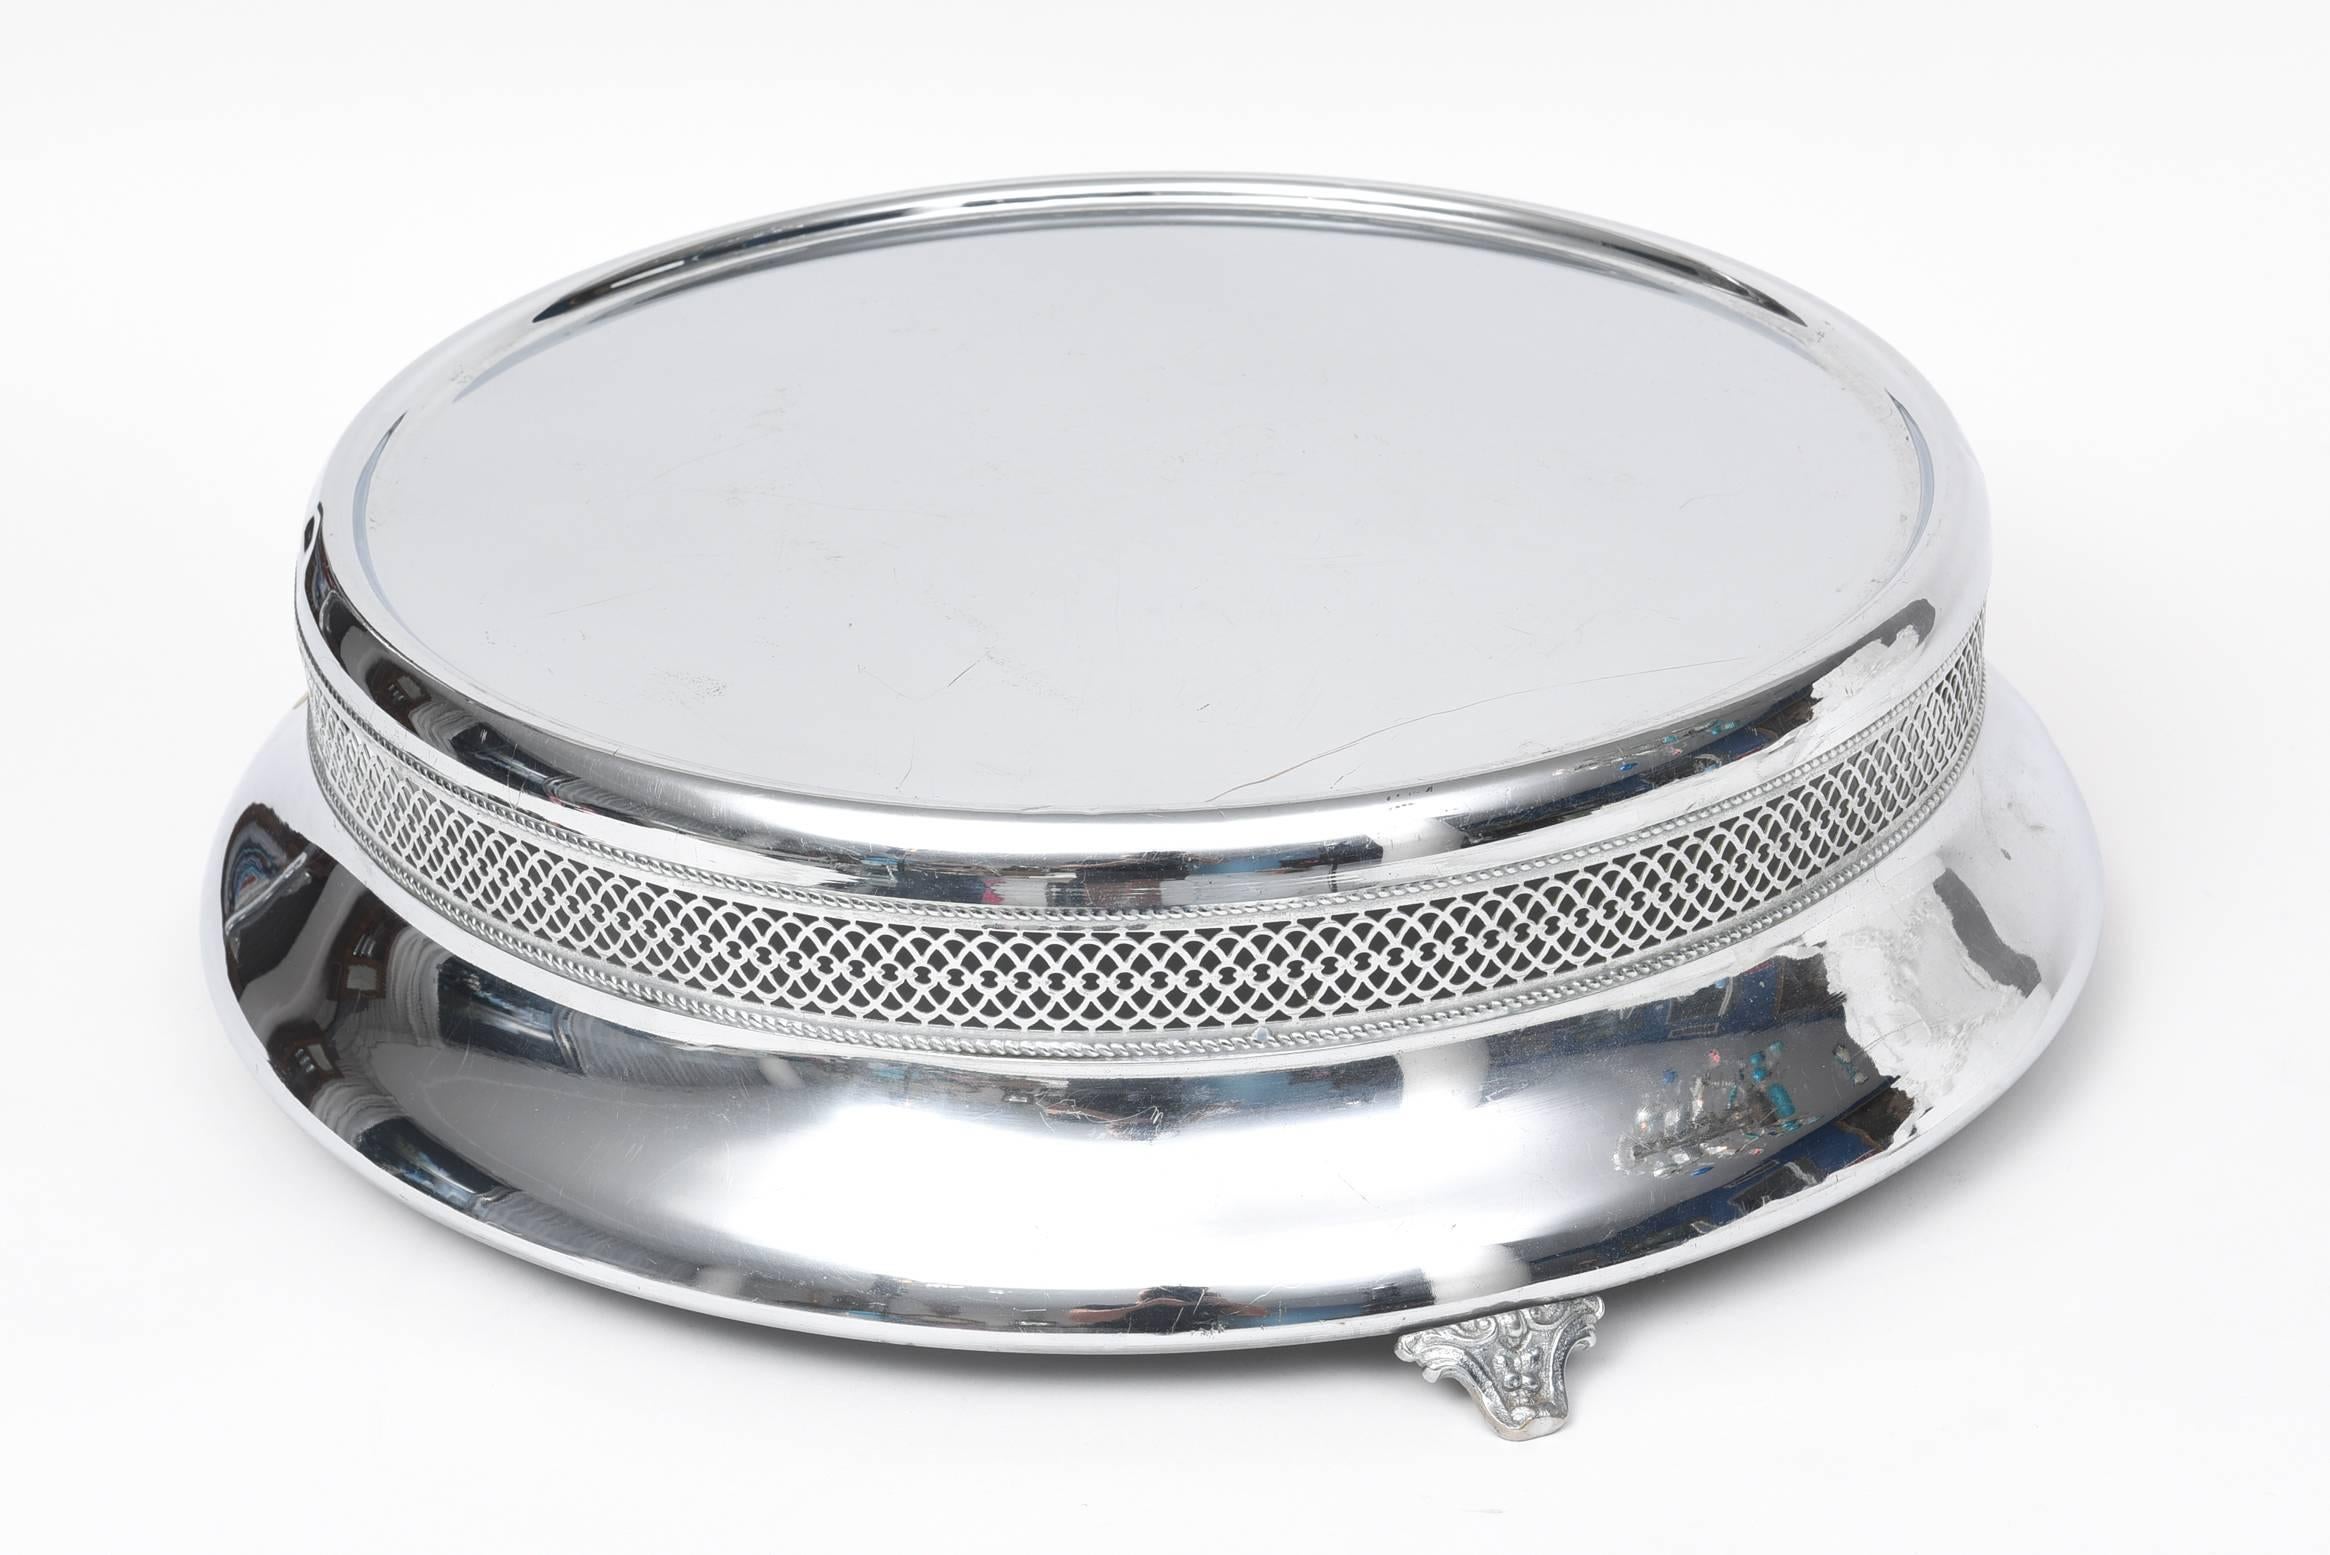 Art Deco chrome wedding cake stand/plateau featuring a pierced ribbon design and footed base. Wonderful centerpiece that can be used on the day of your special occasion and then for many more years as a centerpiece or as a plateau. A piece that can